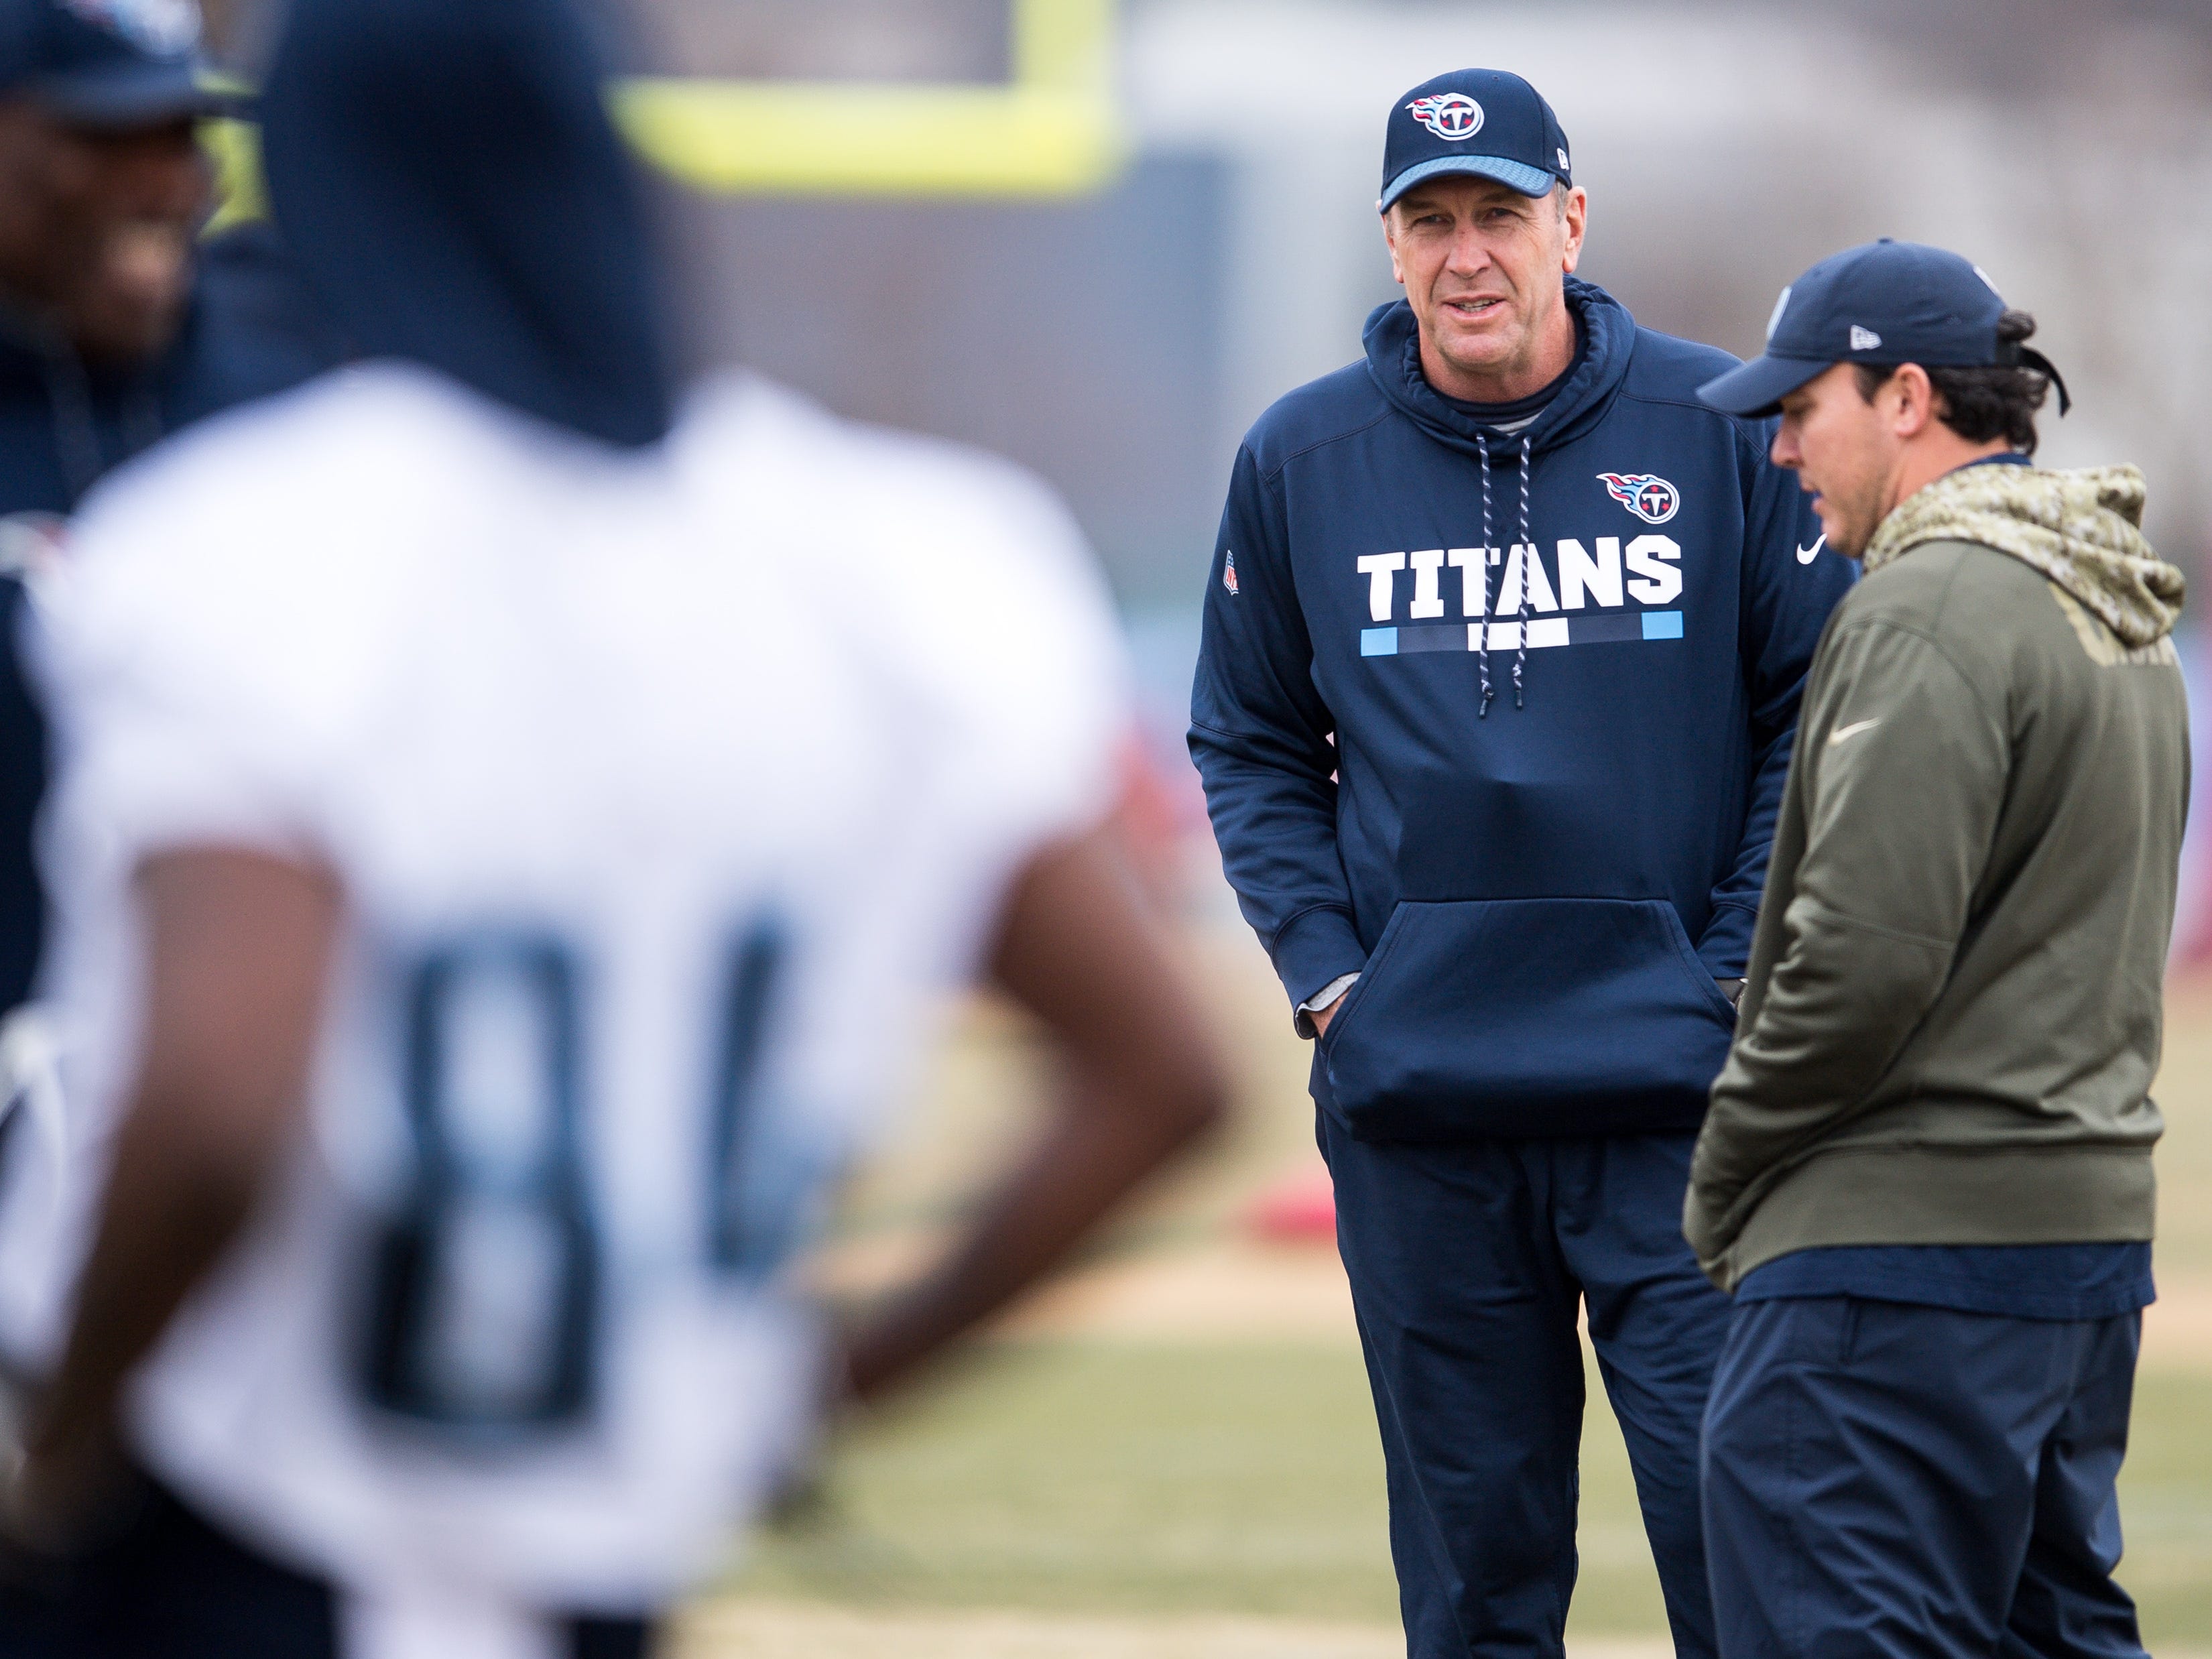 Titans' Mike Mularkey offered extension, anticipates no changes to staff for 2018 season